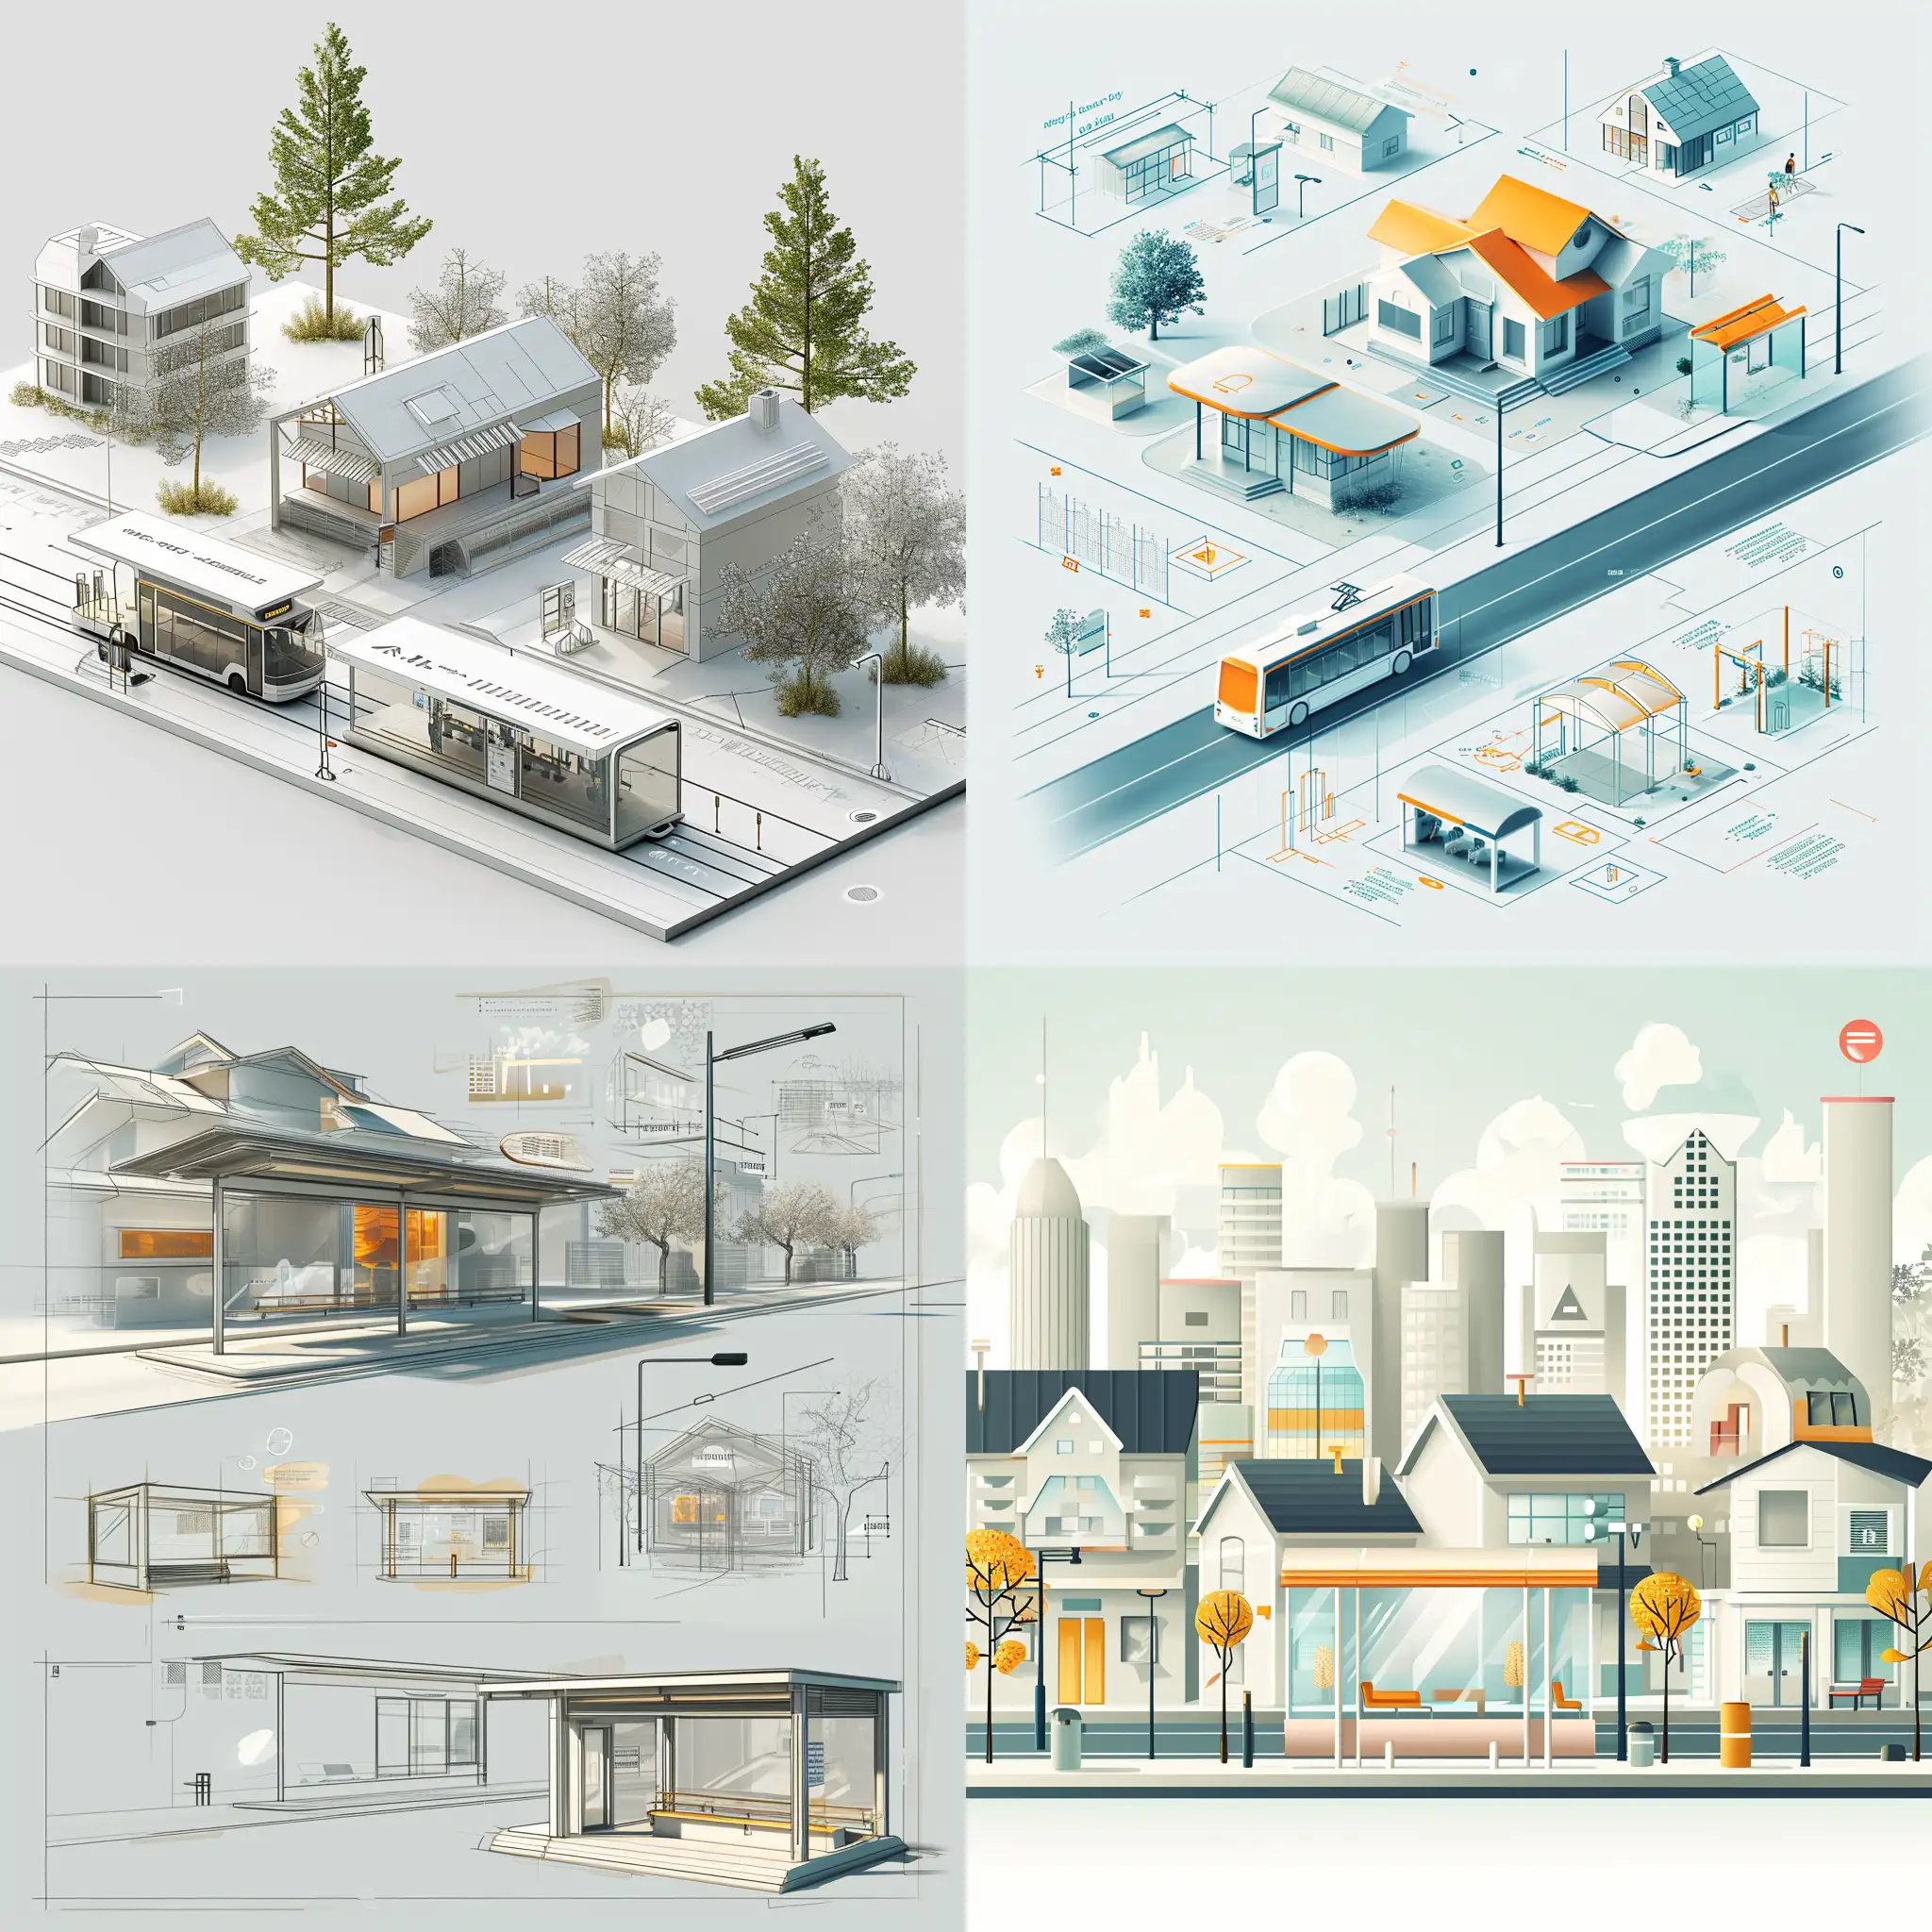 Create a presentation image with high quality, futuristic design, calm colors, digital city sketches, urban planning, house, and bus stop layout